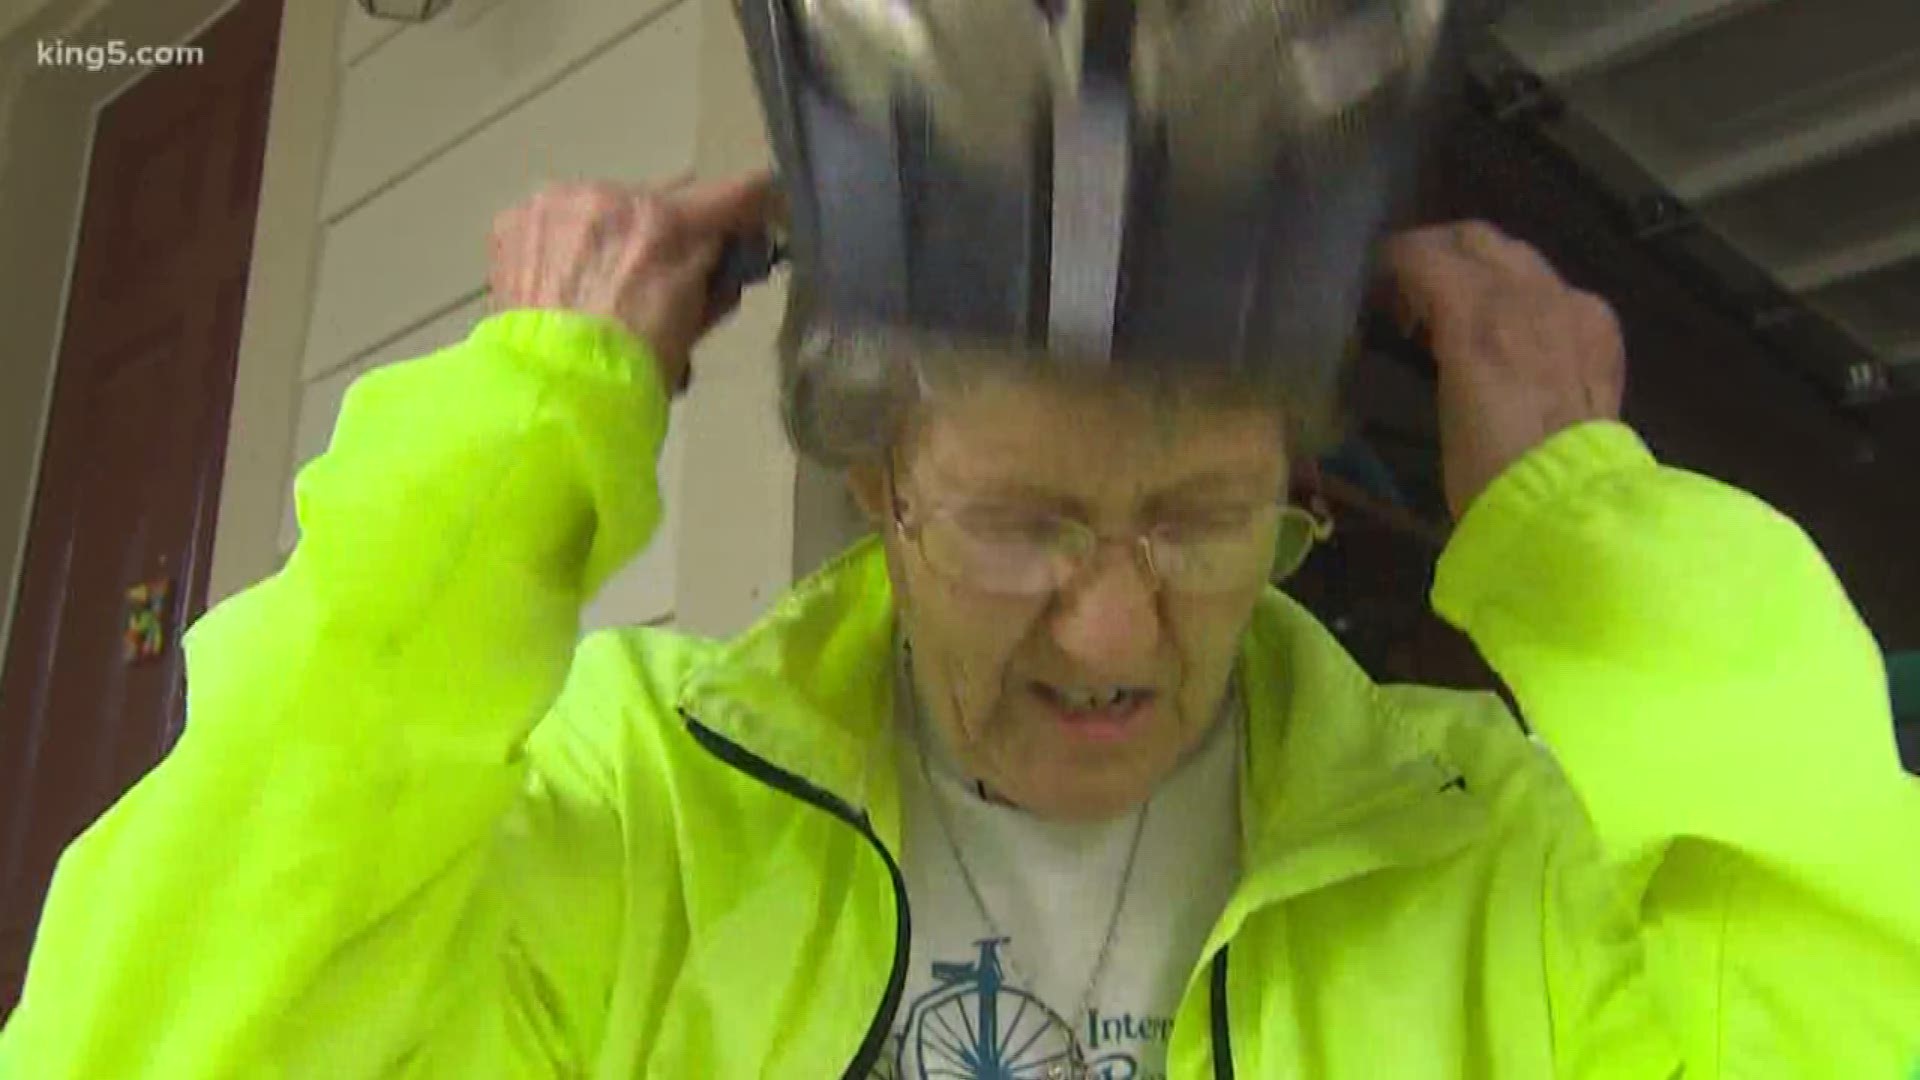 An 86-year-old Lacey grandmother is being recognized for her athleticism! South Bureau Chief Drew Mikkelsen introduces us to the grandma who can't sit still.